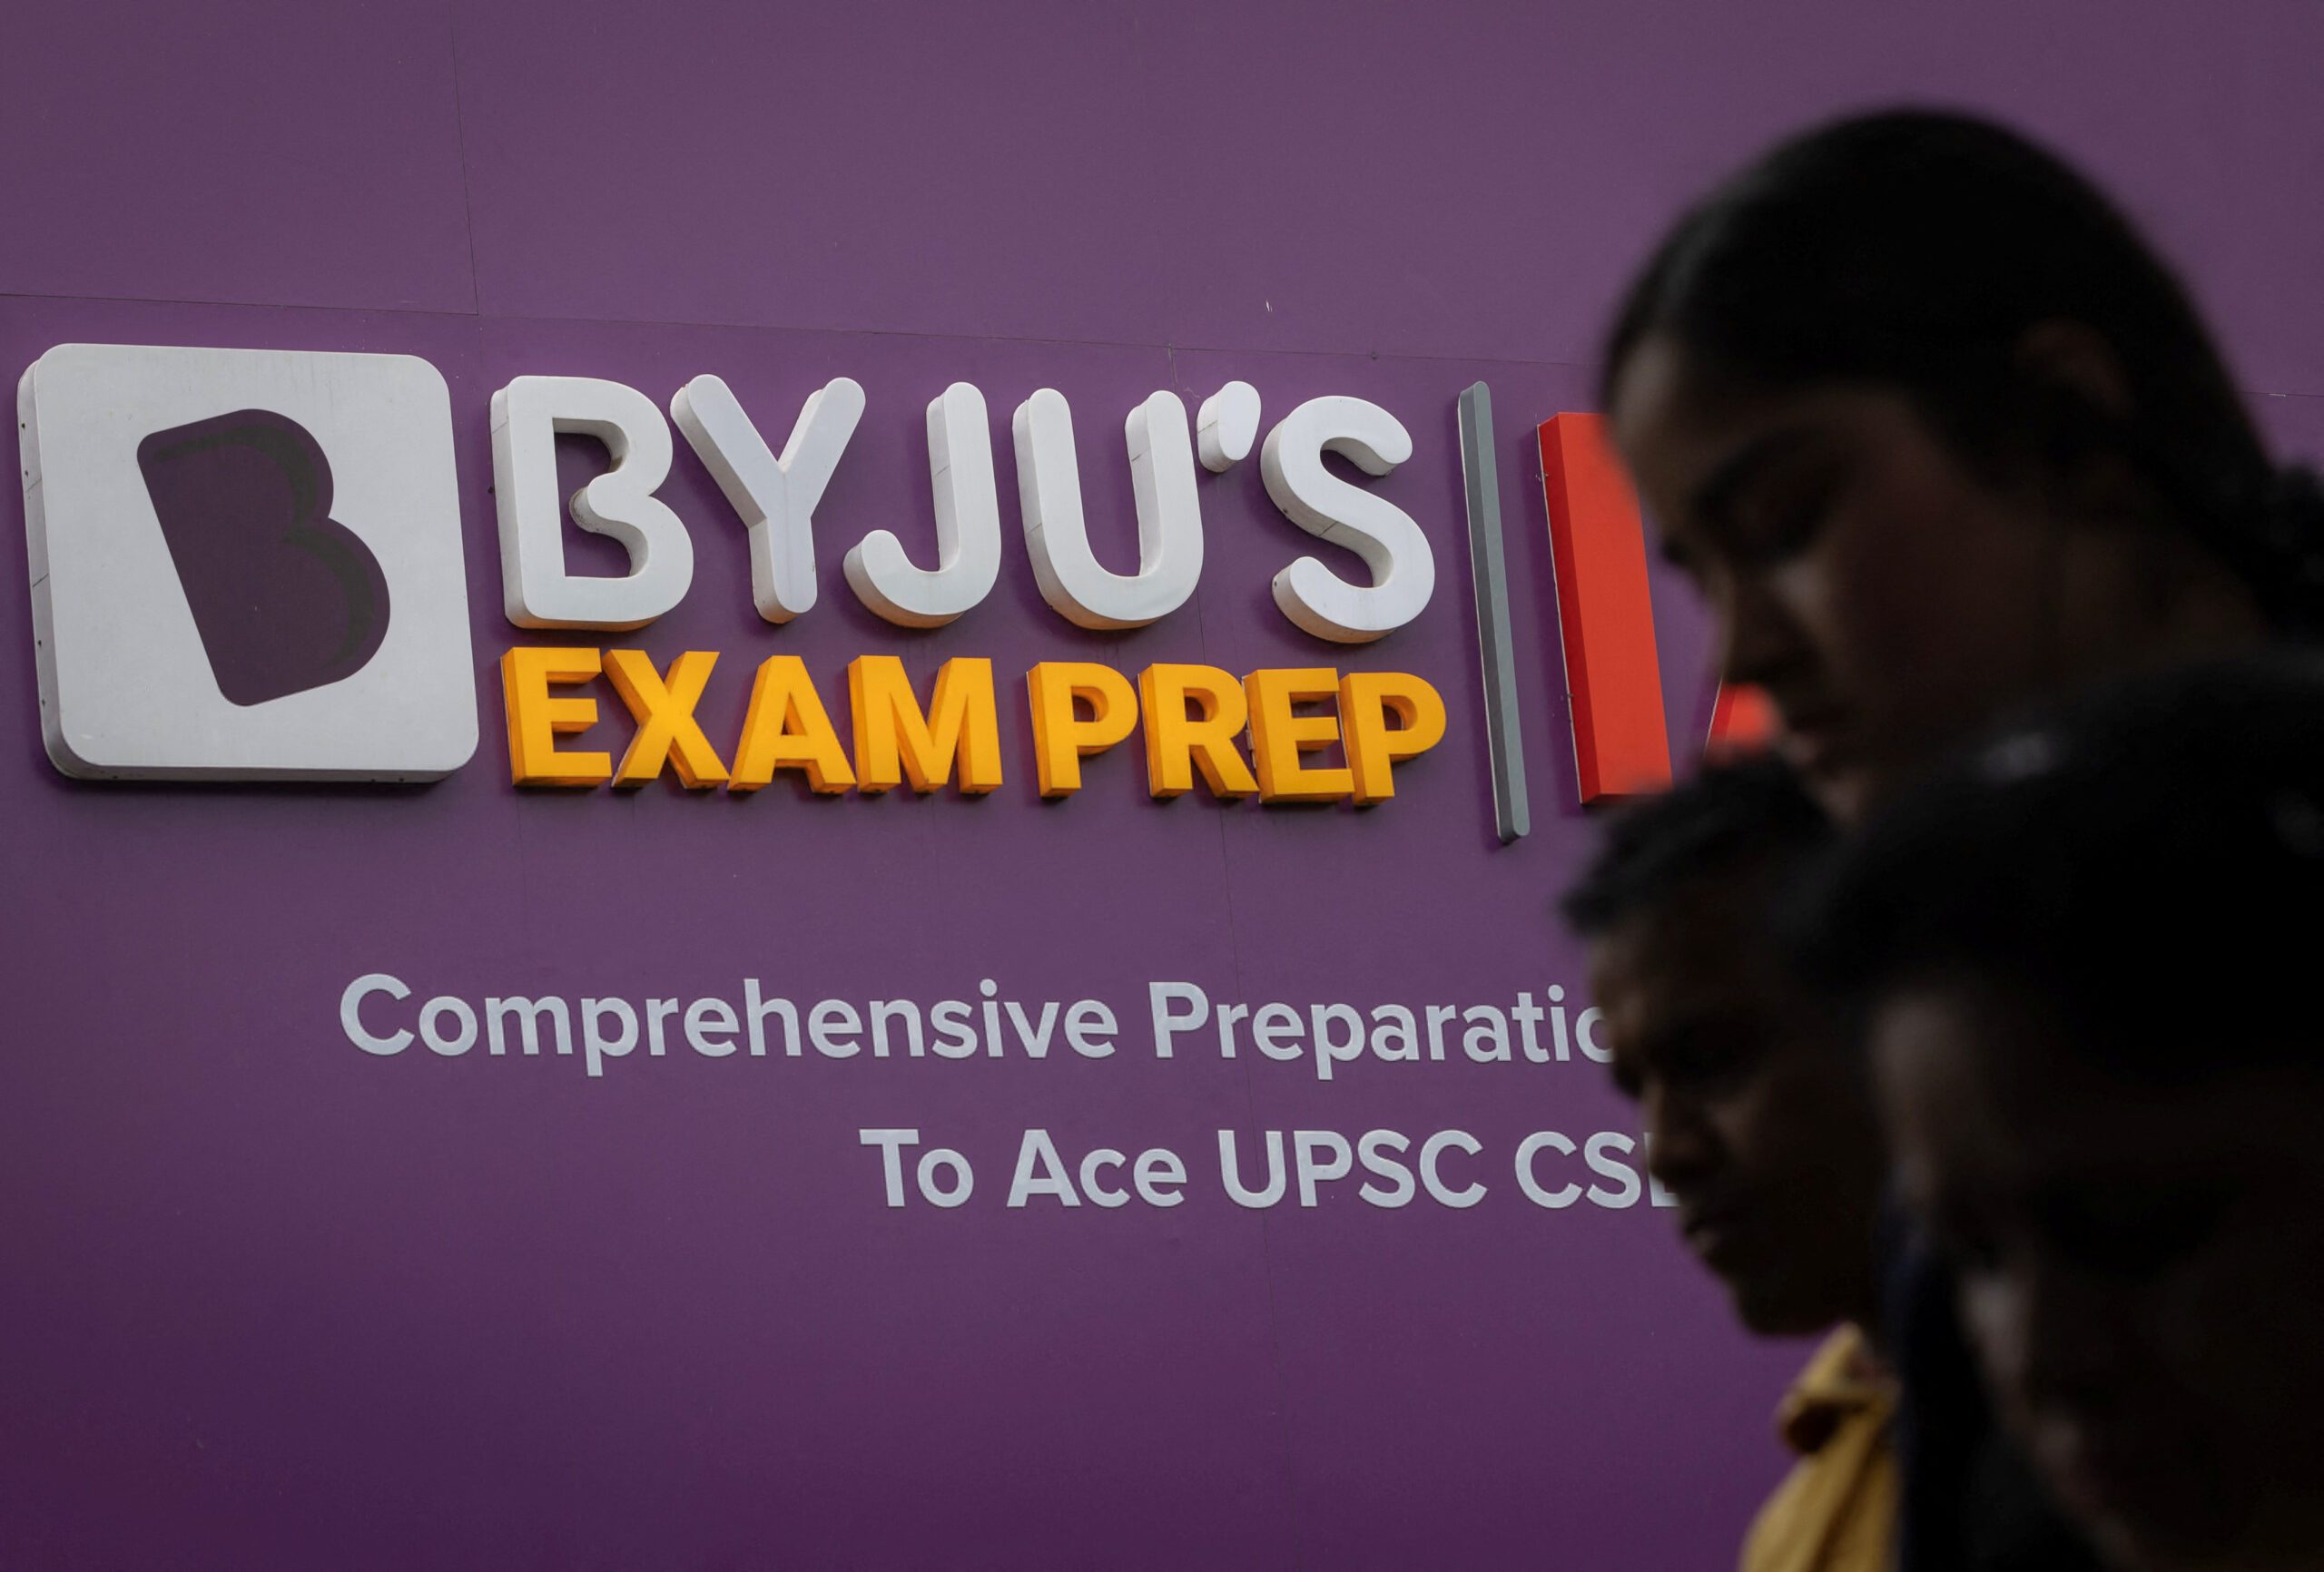 India: Prosus writes off Byju's investment, records $493m loss